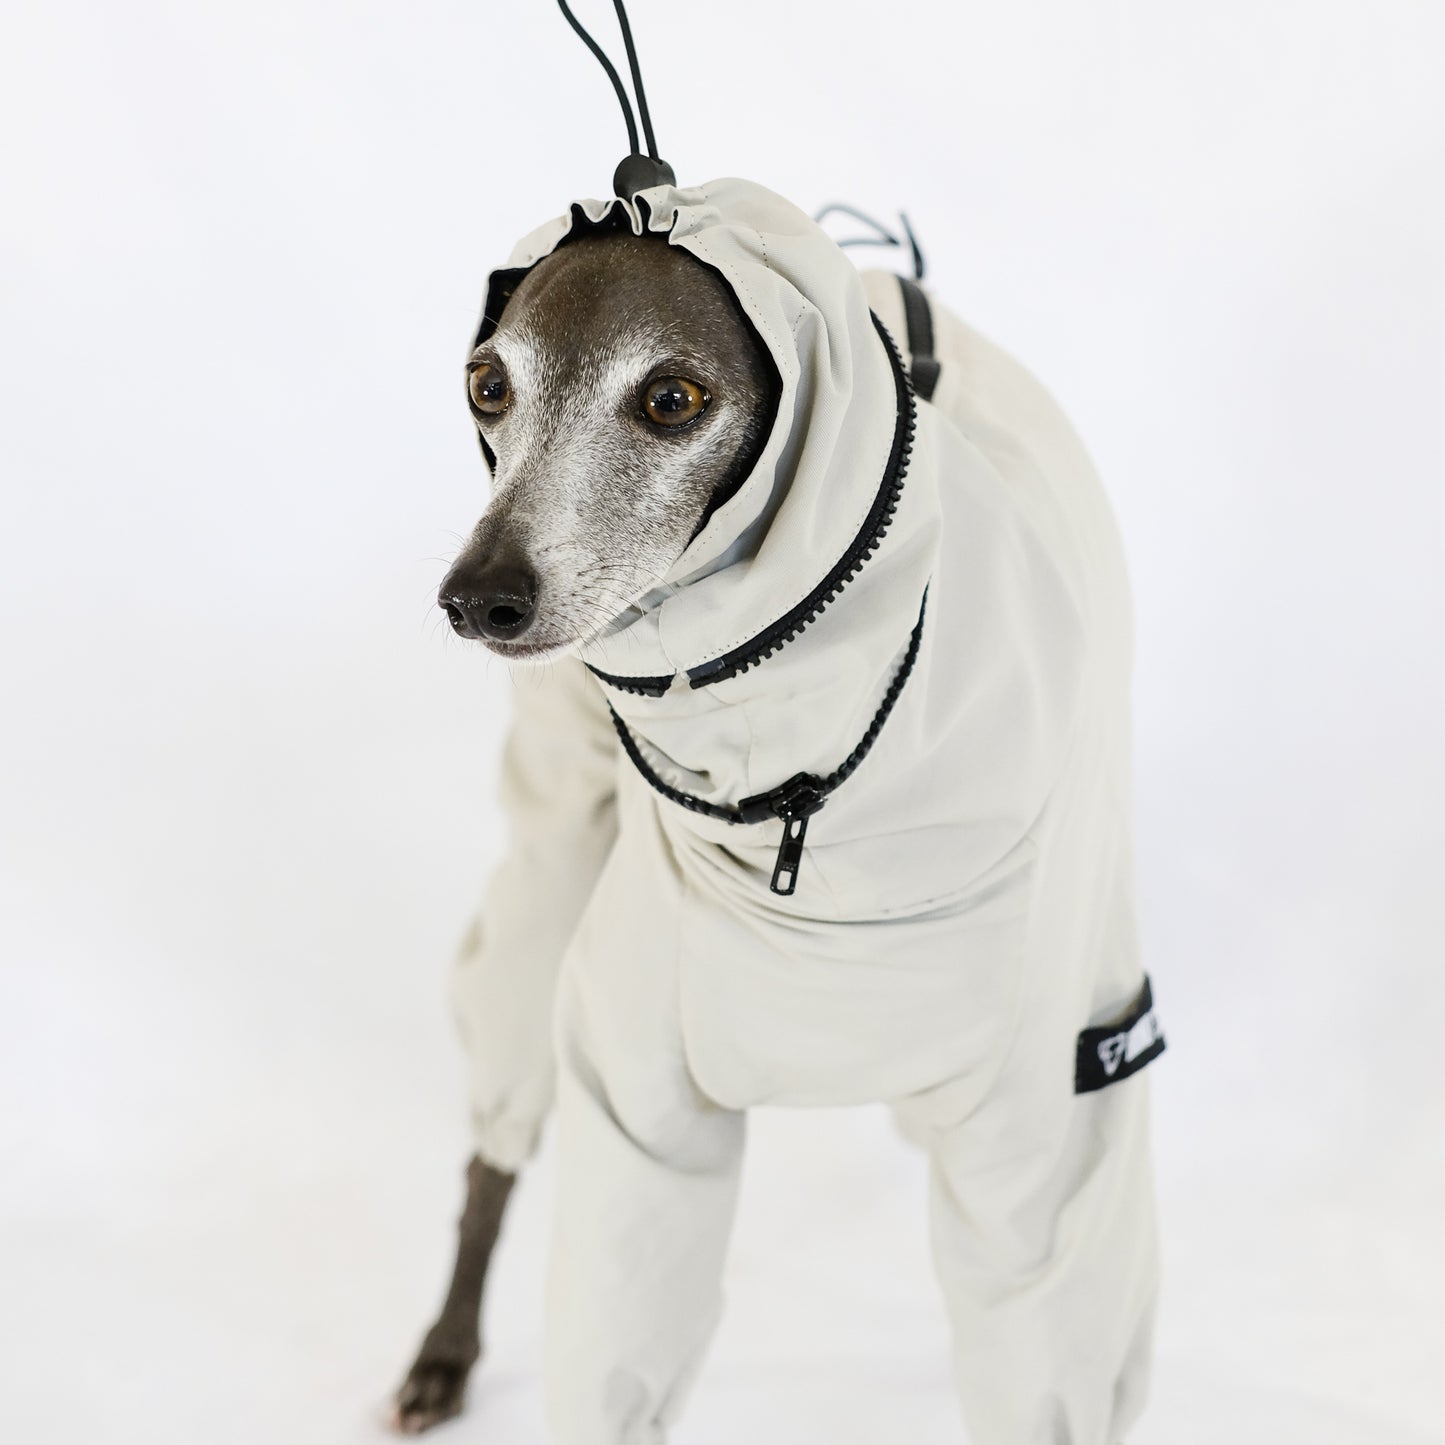 Luxury Italian Greyhound/Whippet clothing, windbreaker, winter coat, water and dirty repellent.